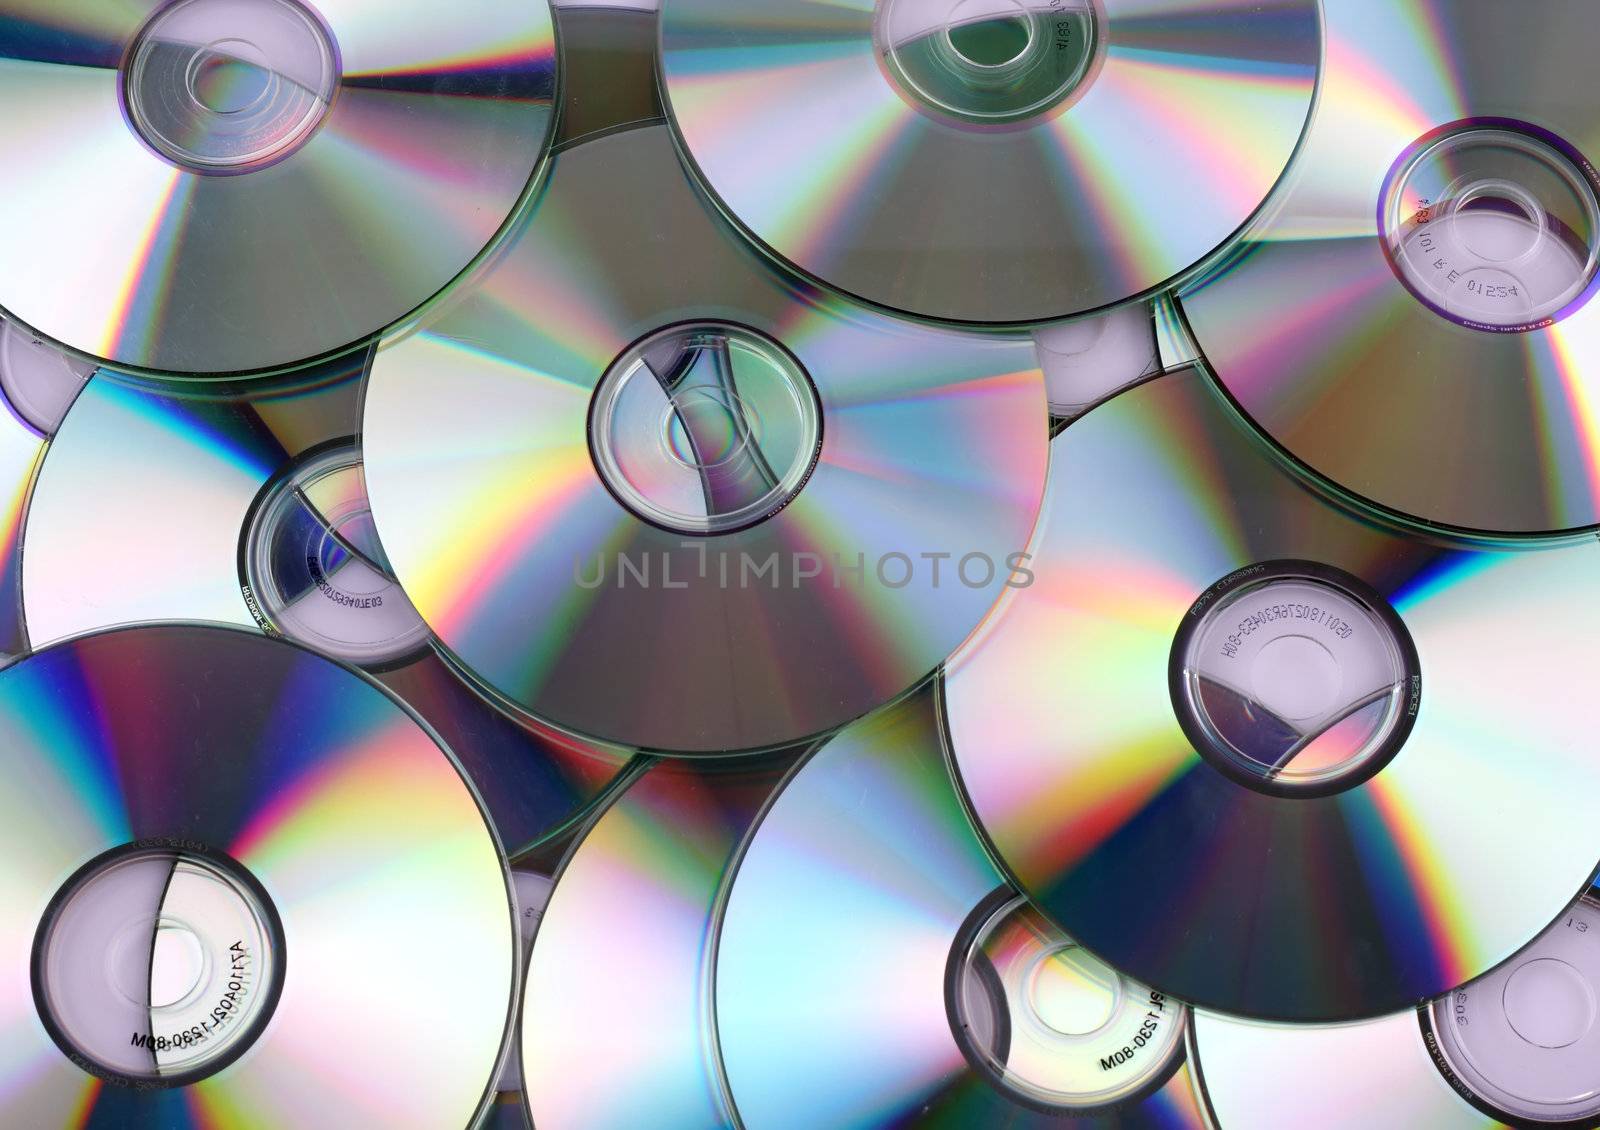 compact discs by Hoomar